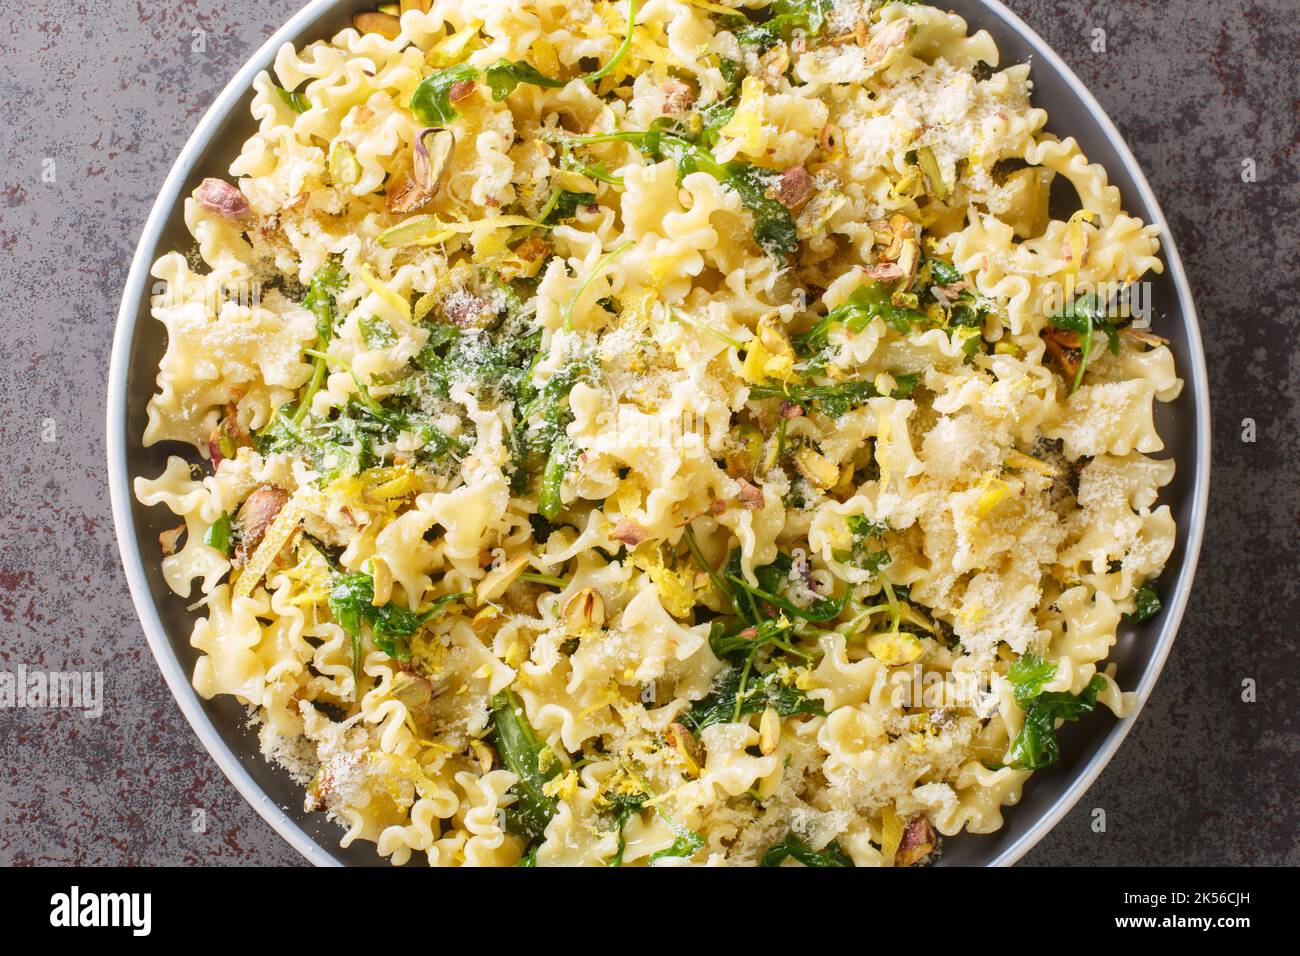 Mafalda pasta salad with arugula, roasted pistachios, parmesan cheese and lemon zest close-up on a plate on the table. horizontal top view from above Stock Photo